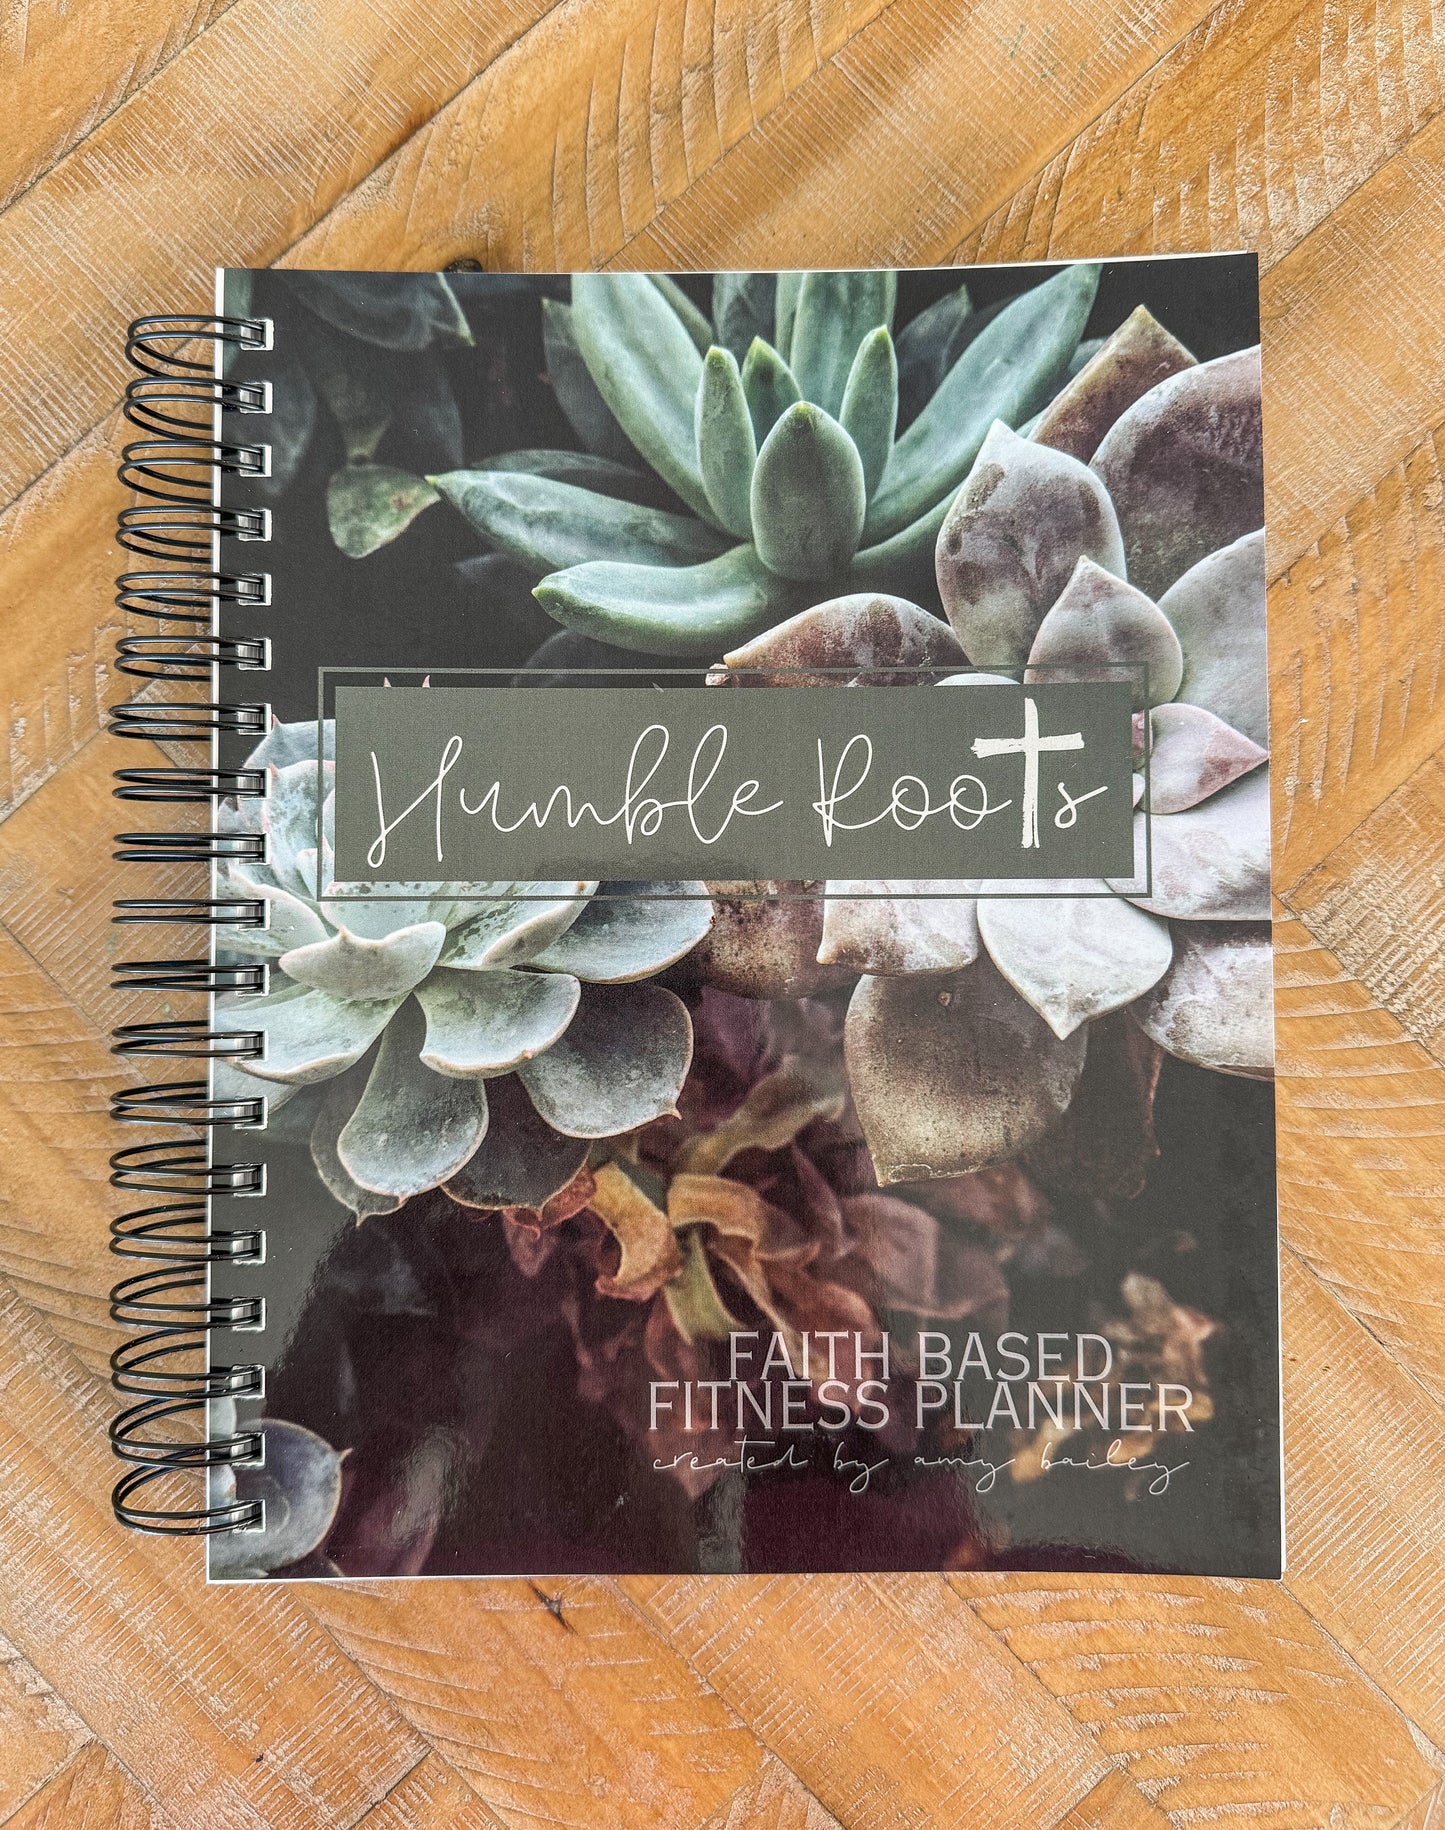 2024 Humble Roots - Faith Based Fitness Planner (Succulent Print)